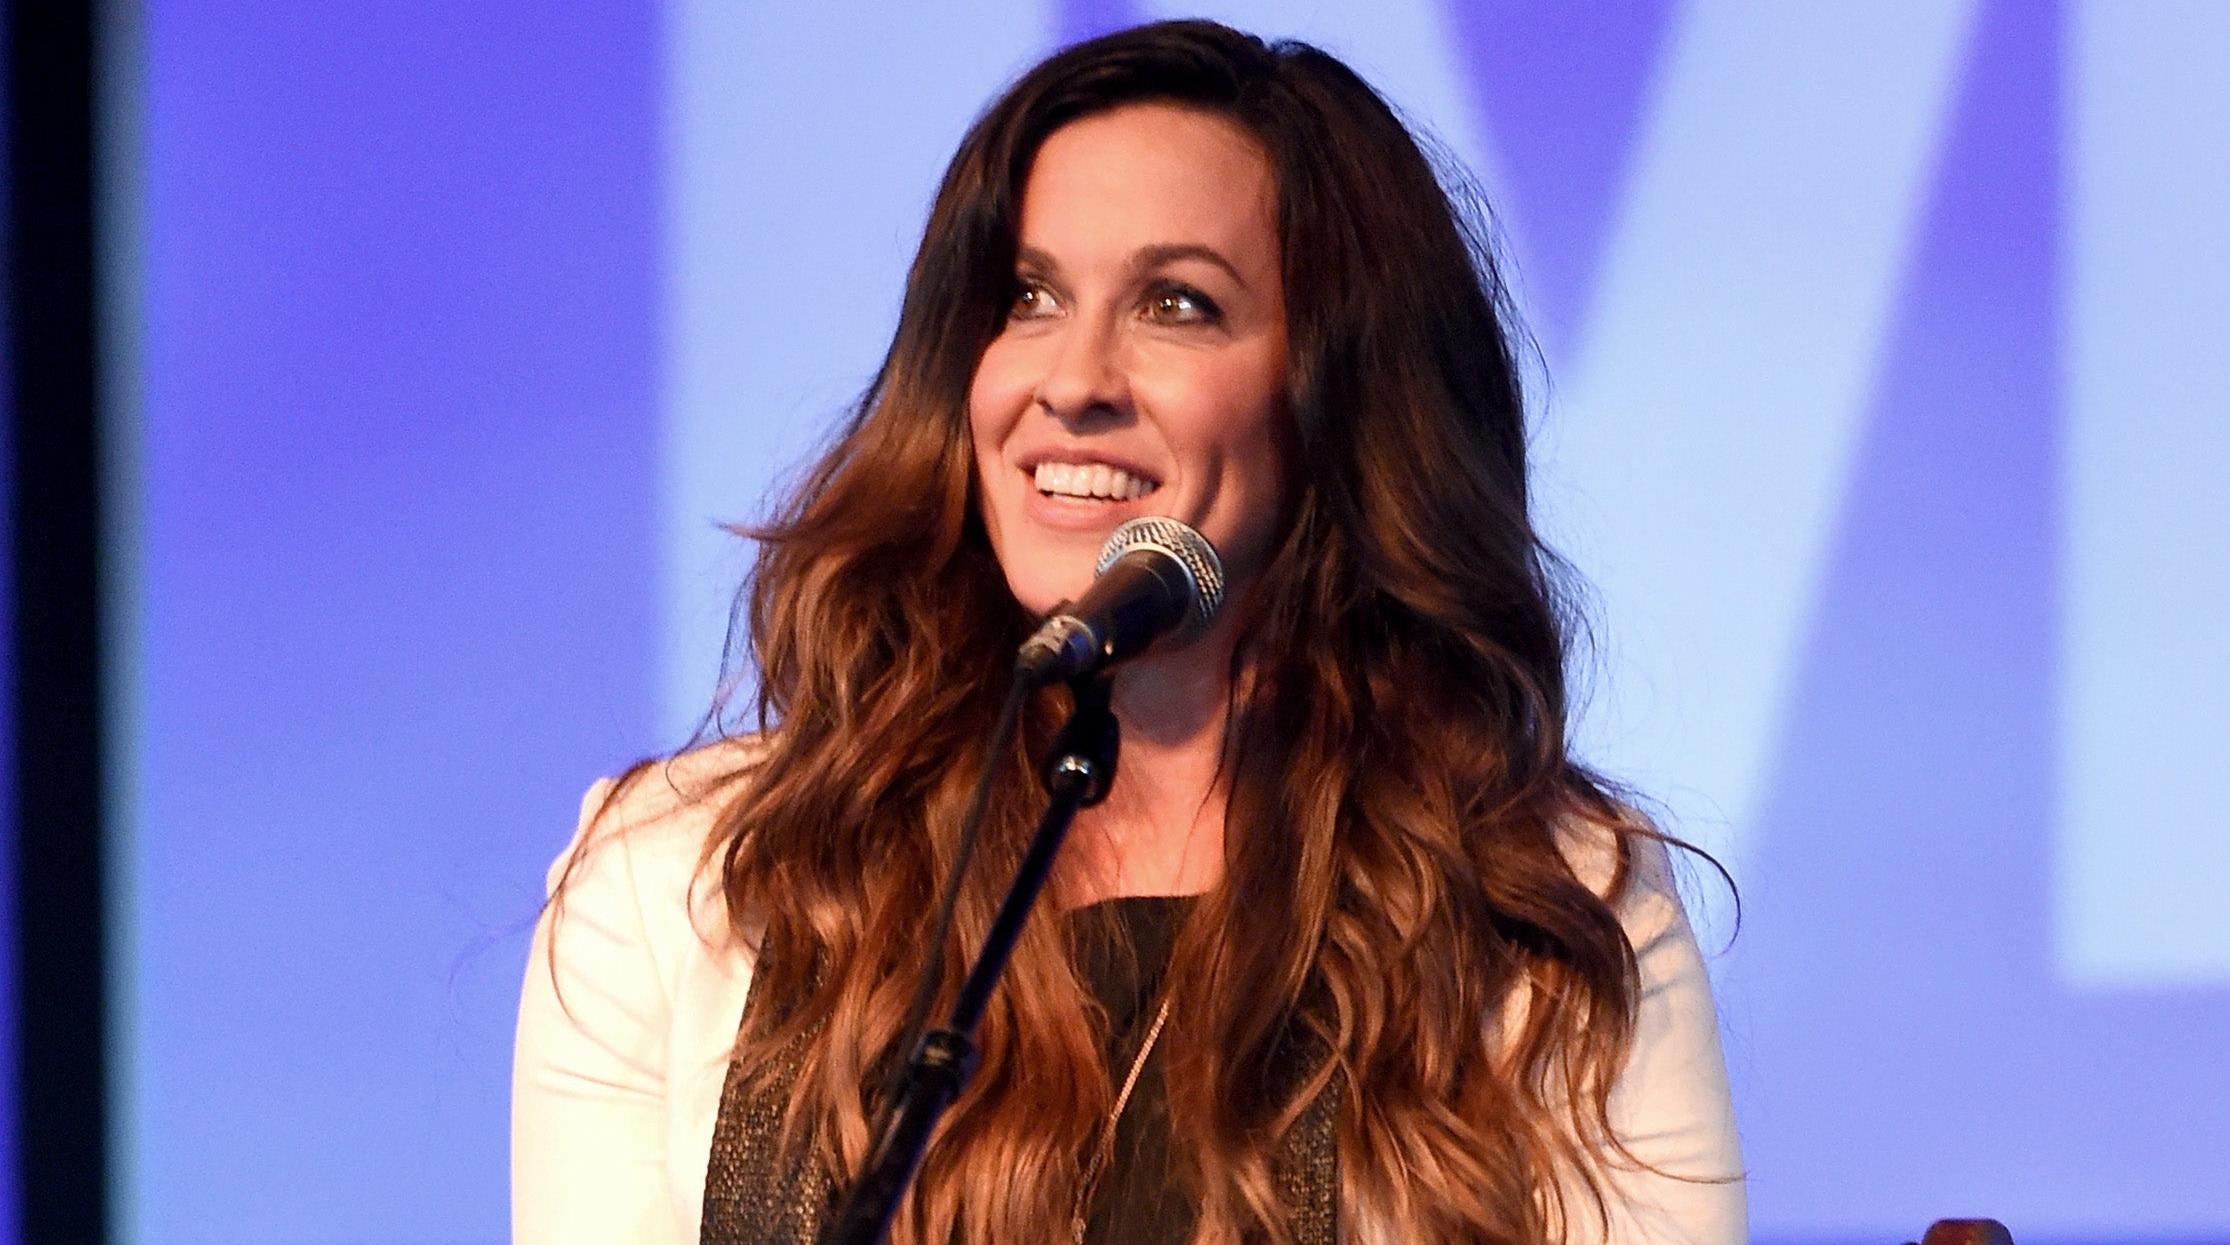 Alanis Morissette’s life is being turned into an ABC sitcom